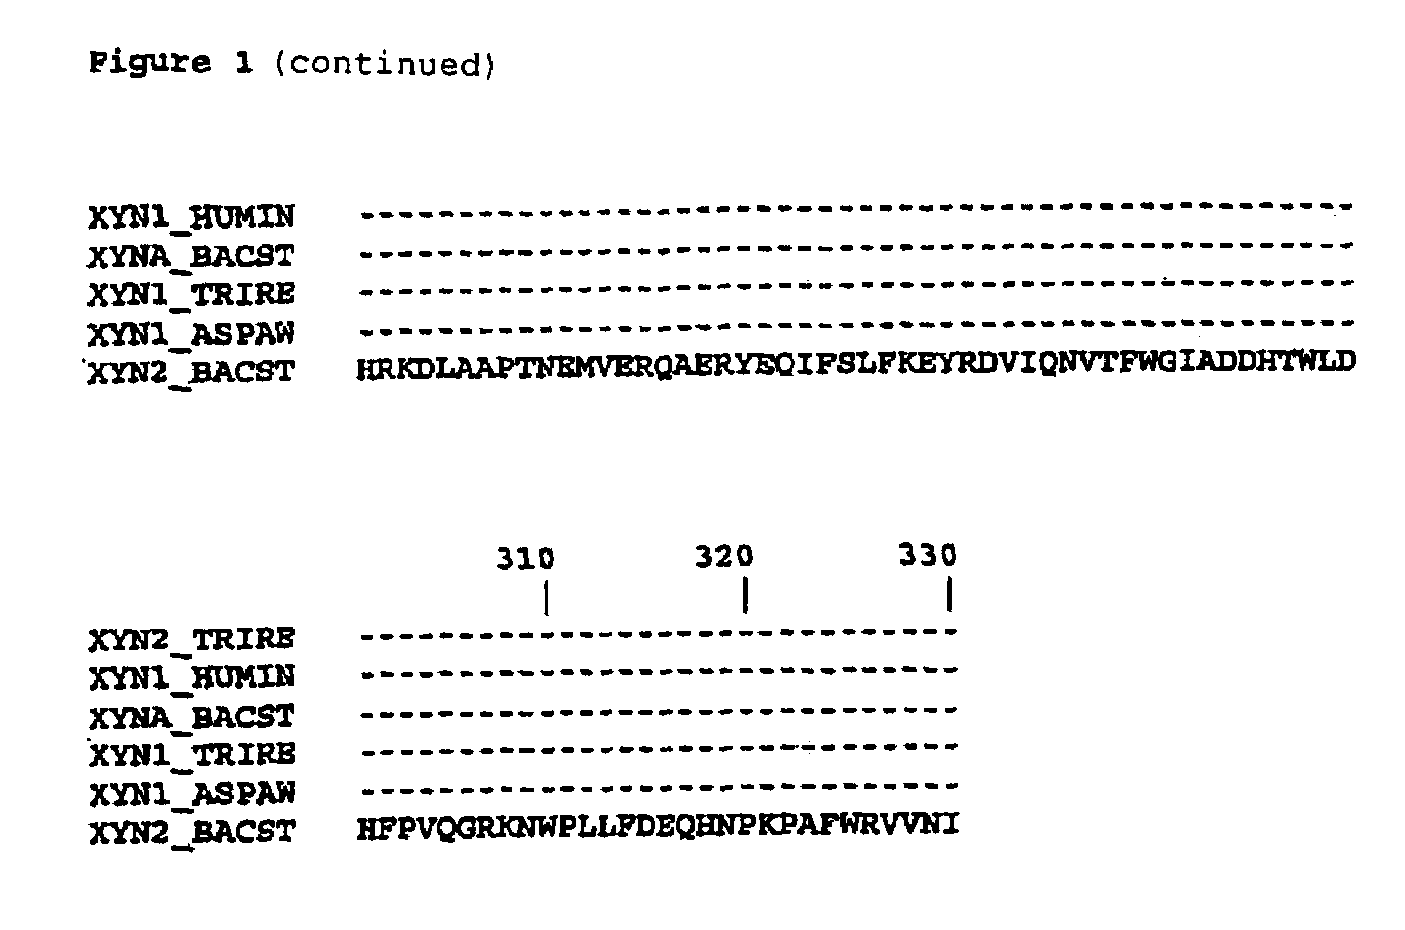 Modified enzymes, methods to produce modified enzymes and use thereof